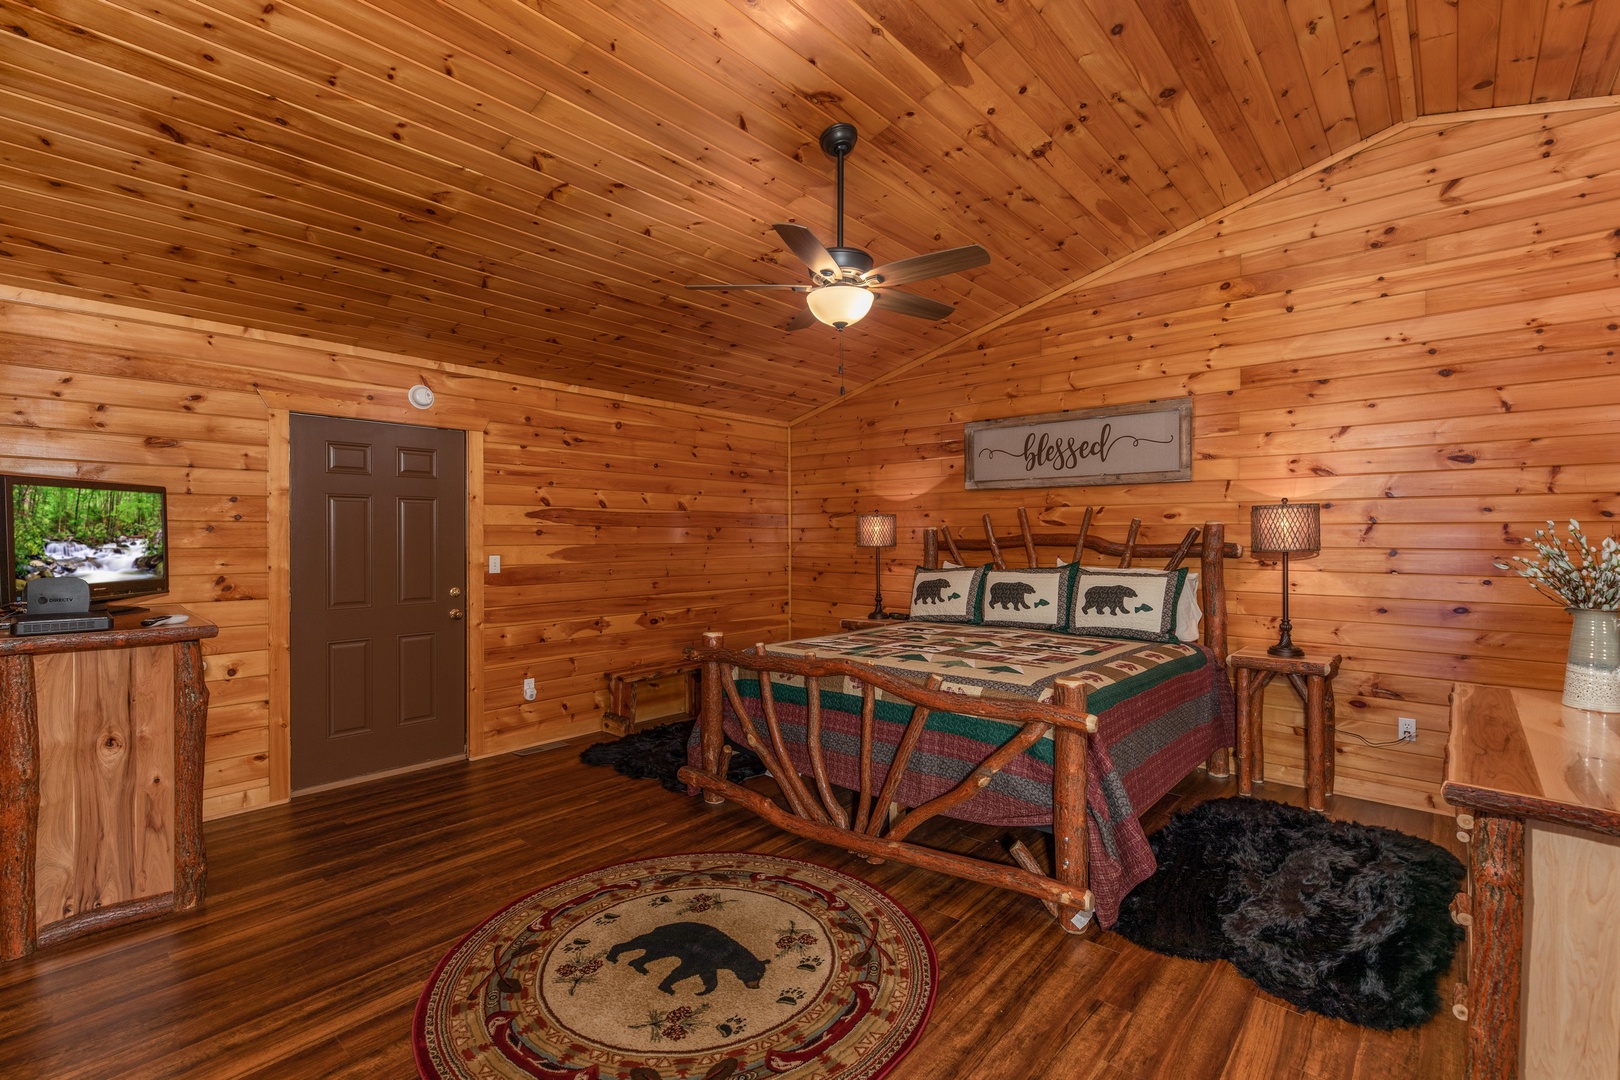 Bedroom with a log bed, dressers, and a TV at Hawk's Heart Lodge, a 3 bedroom cabin rental located in Pigeon Forge